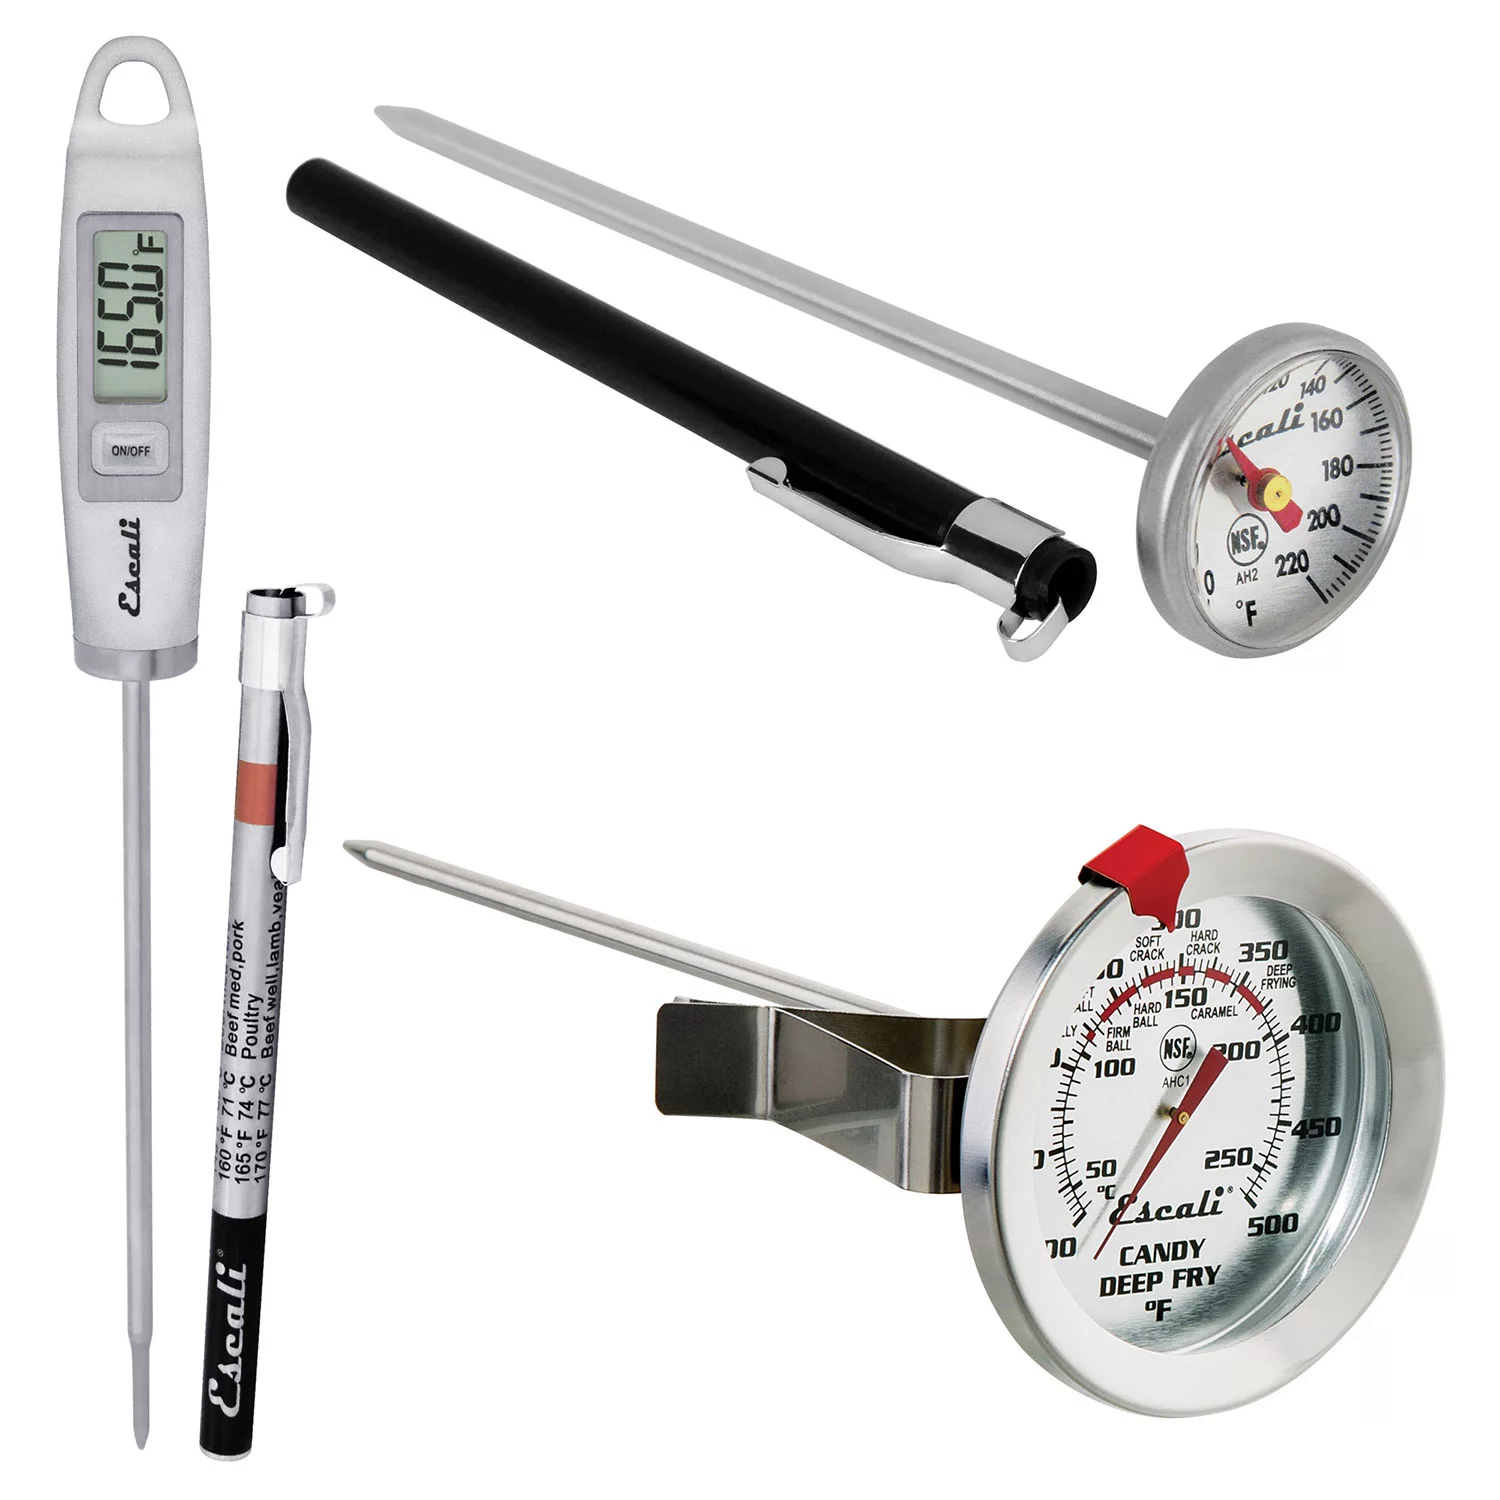 Buy from Fornaxmall.com Buy from fornaxmall.com Home Thermometer 3 individual Pieces Set, AHC1, AH2, DH1-S (3)